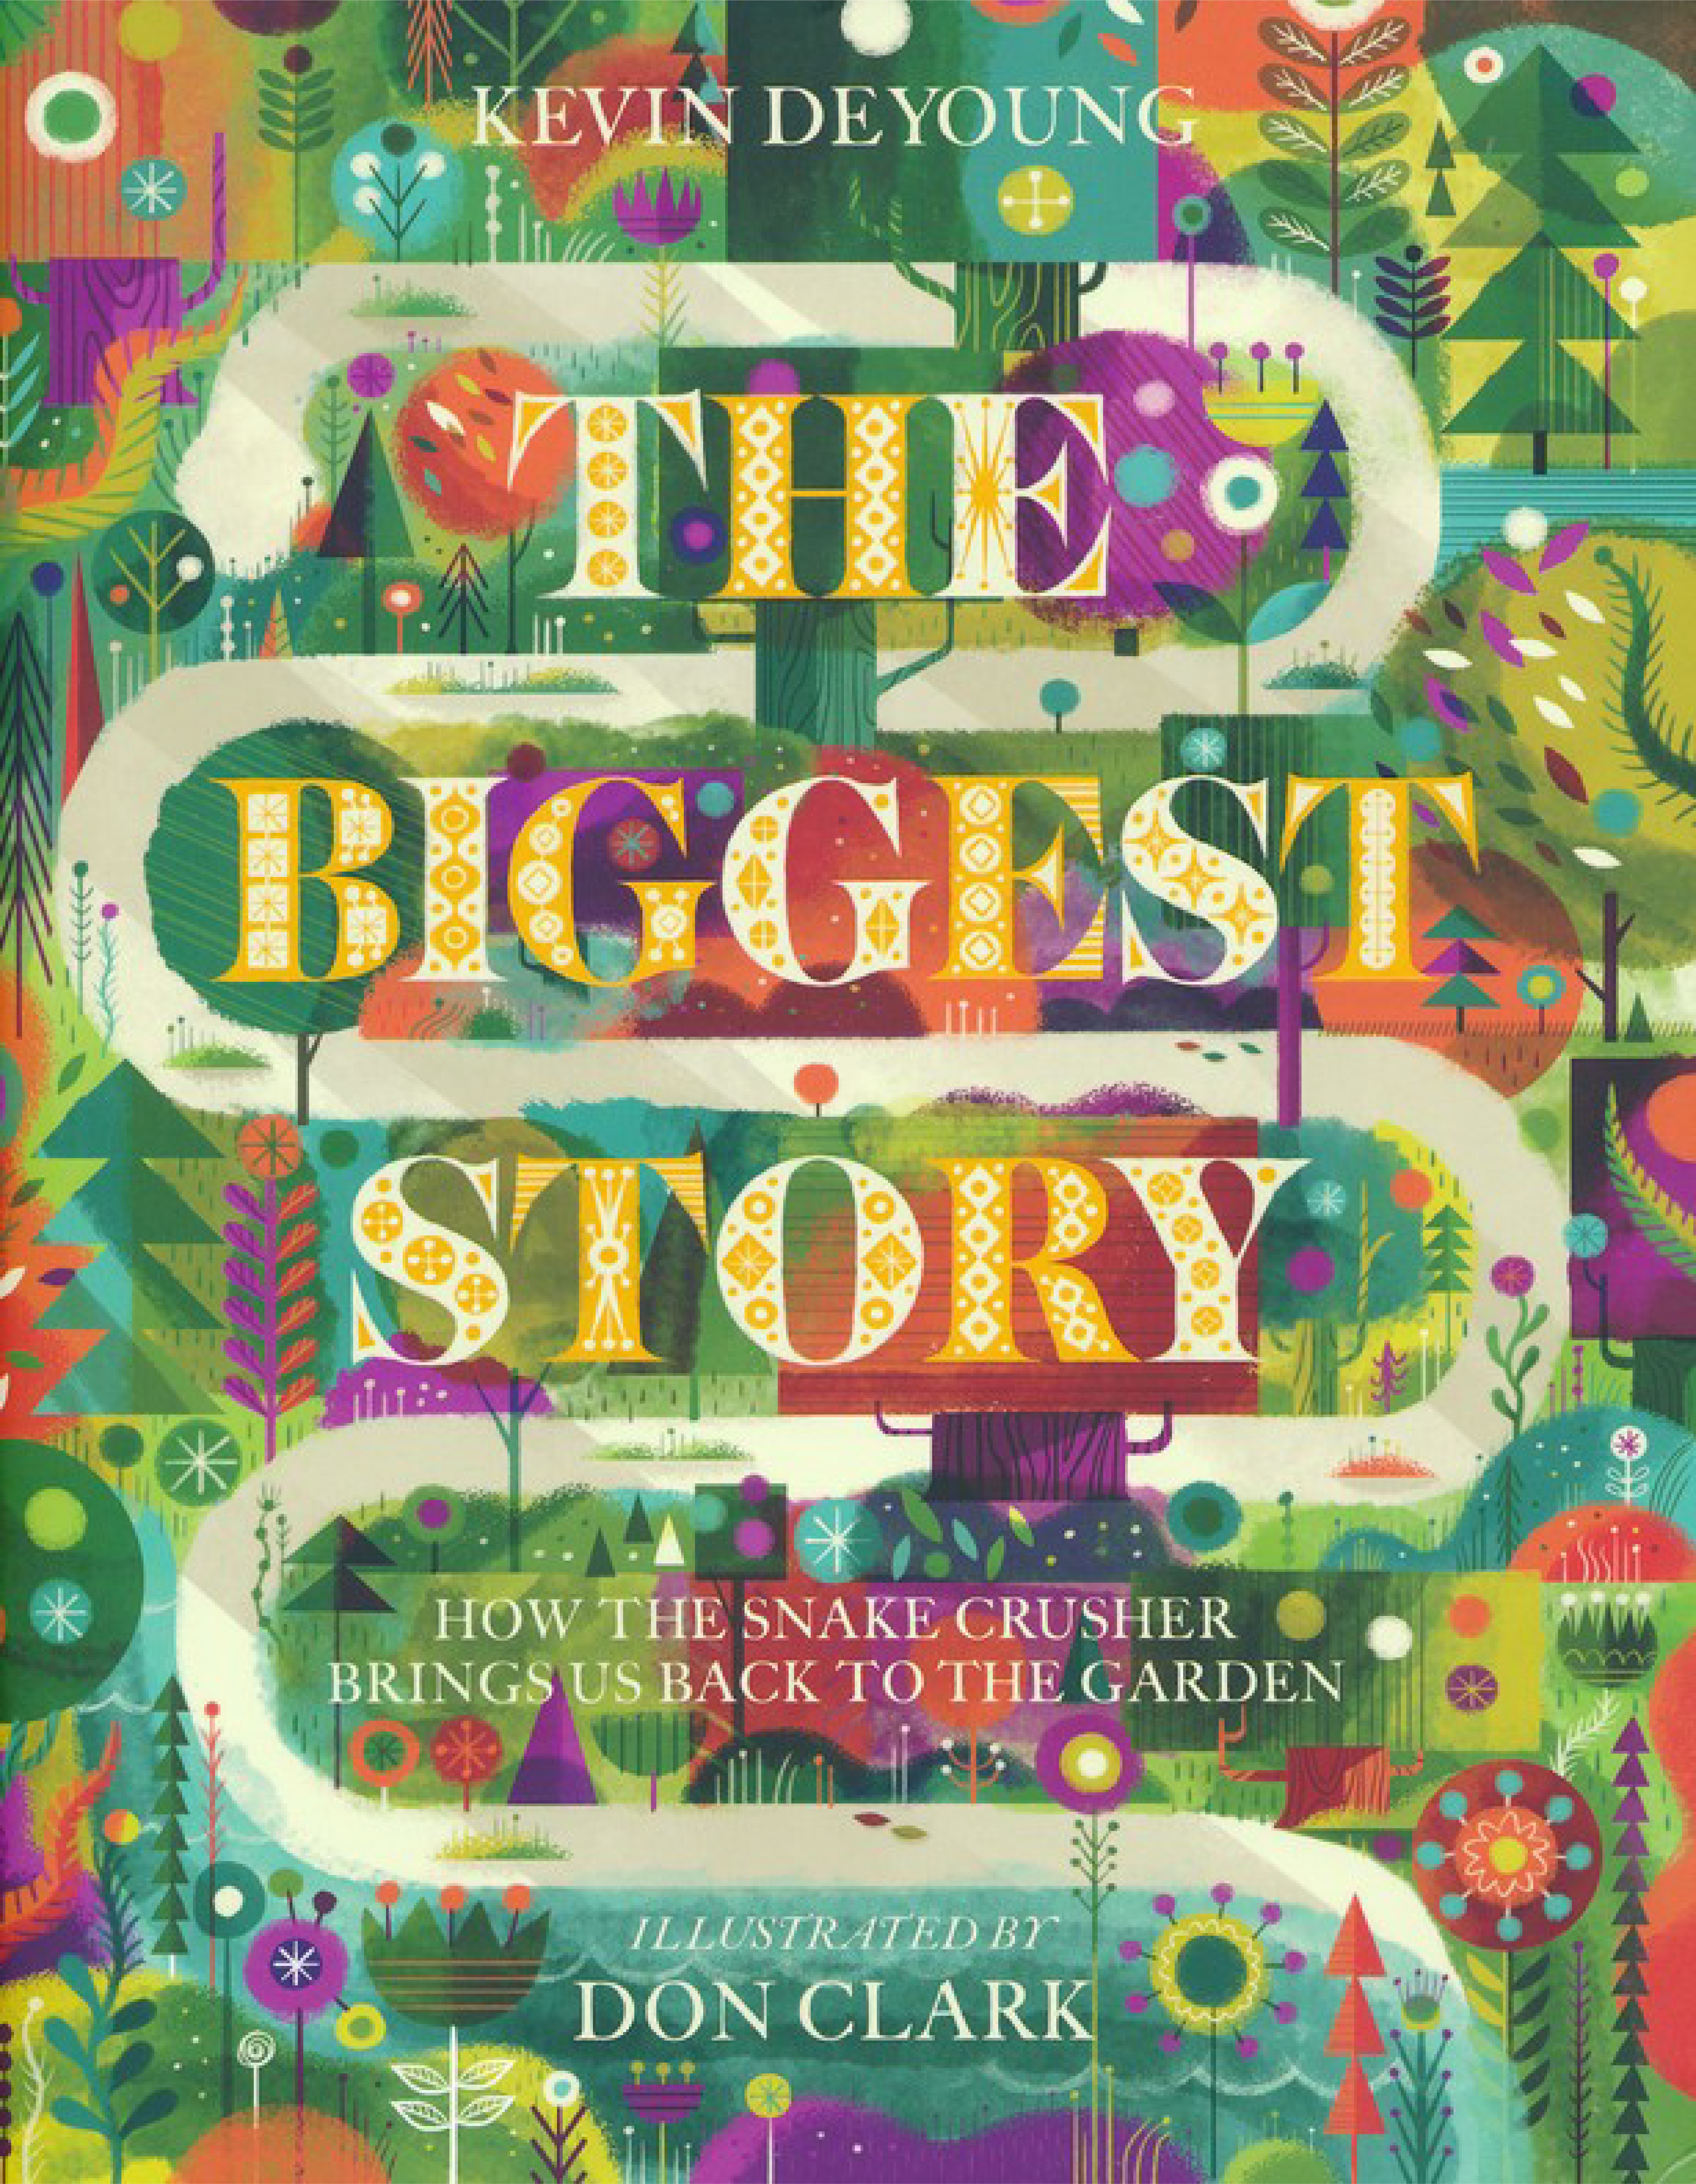 The Biggest Story Book Cover